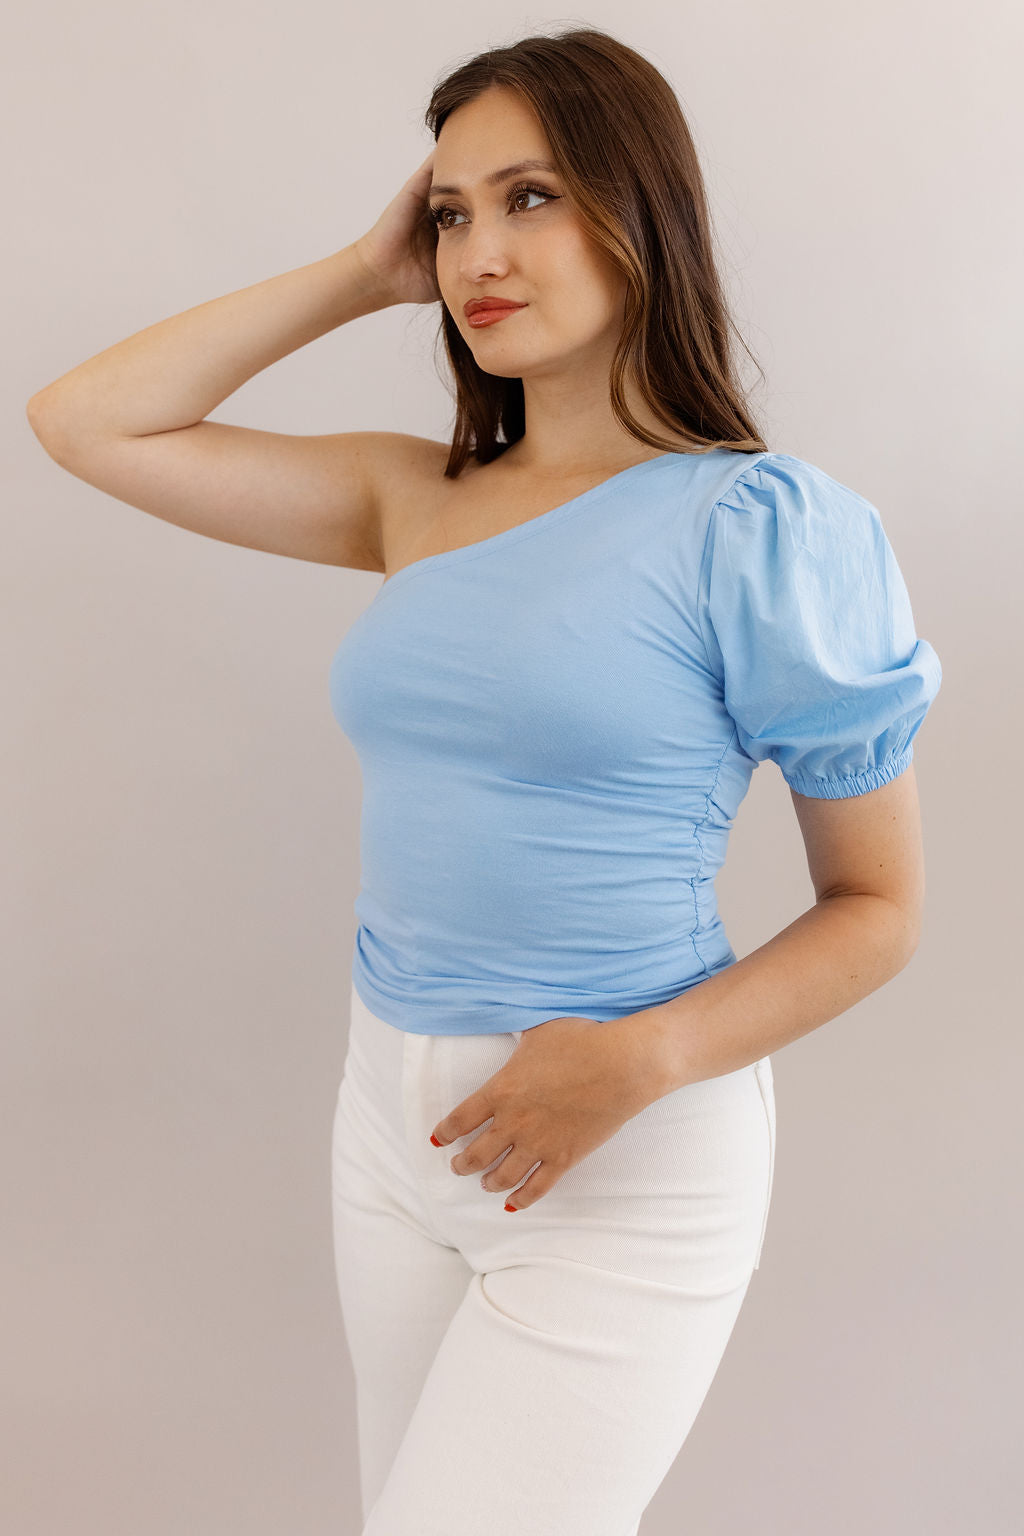 French Connection | Rosanna One Shoulder Top | Placid Blue - Poppy and Stella